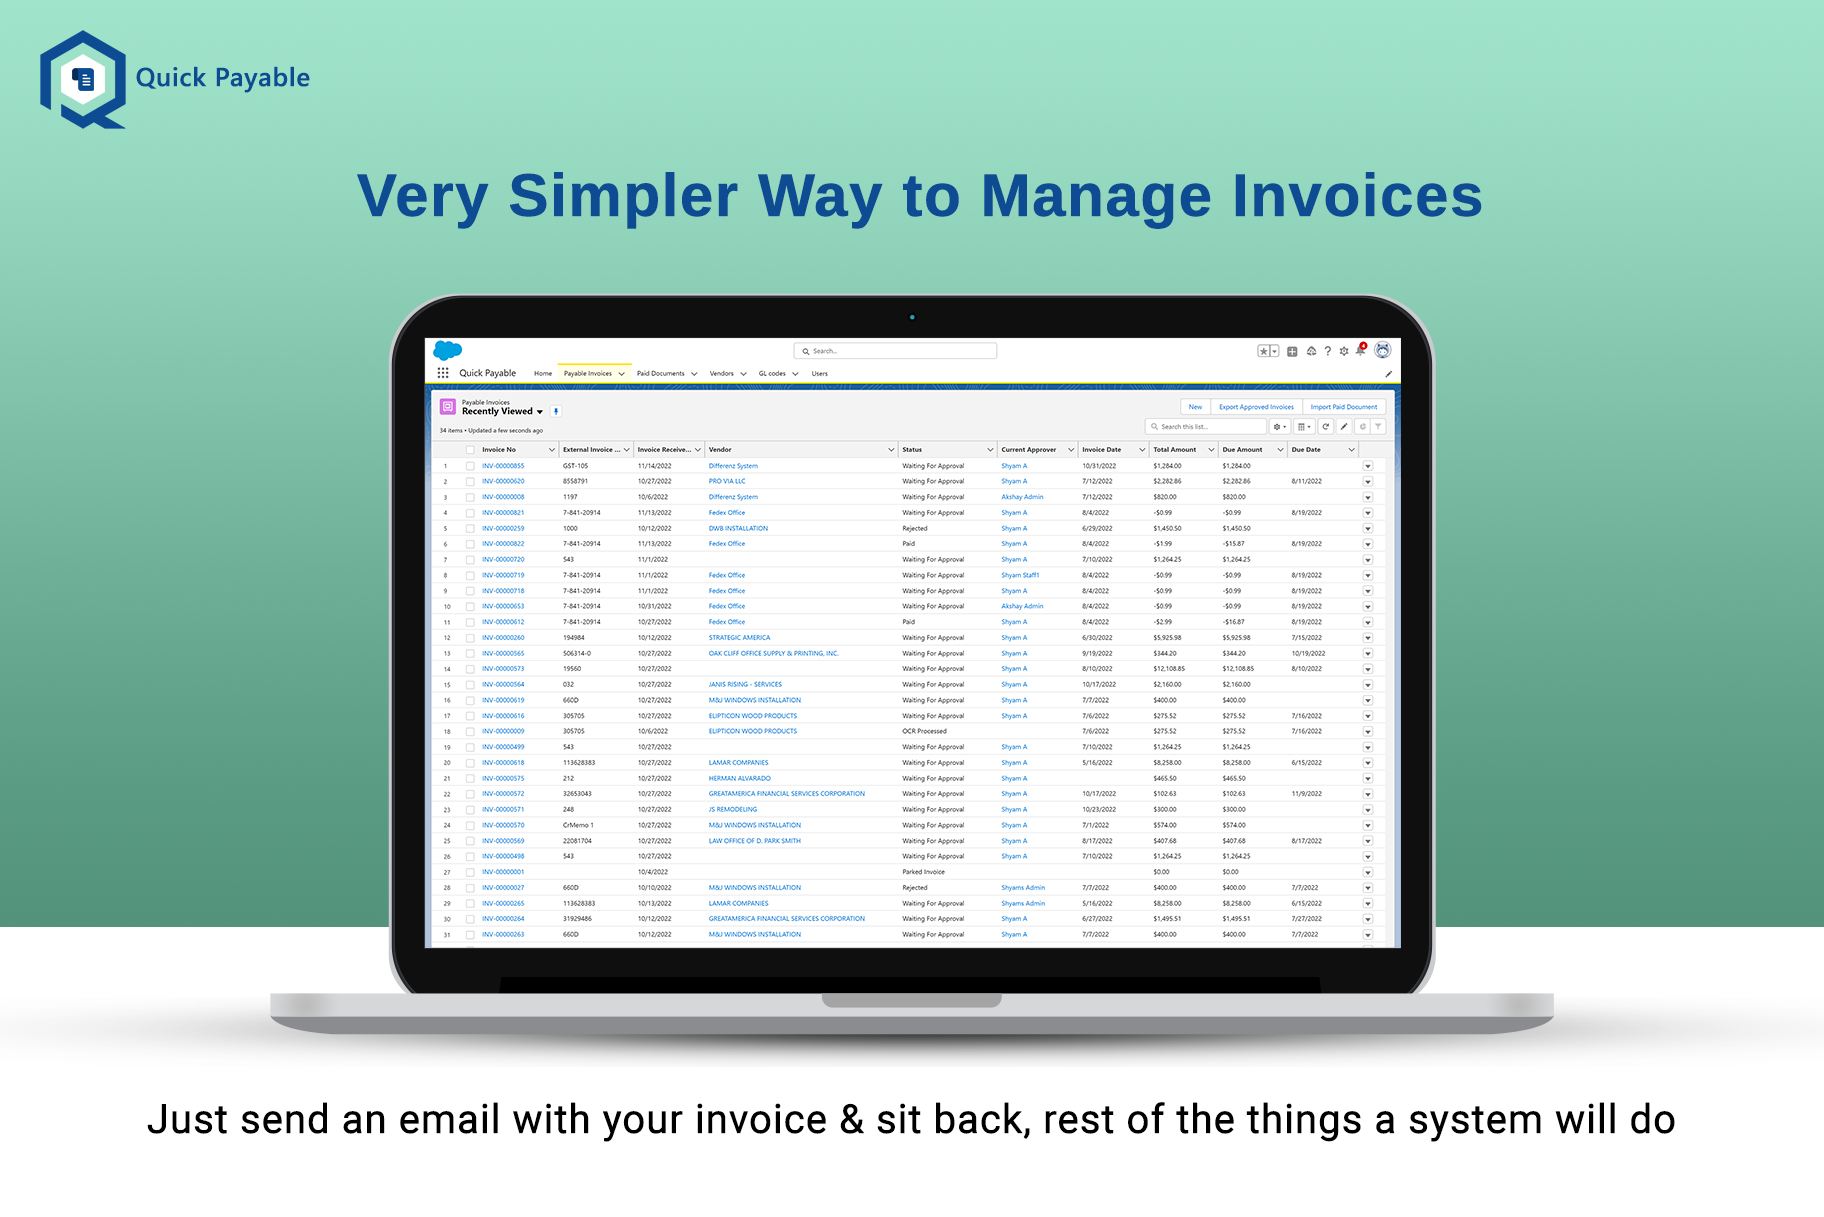 Very Simpler Way to Manage Invoices